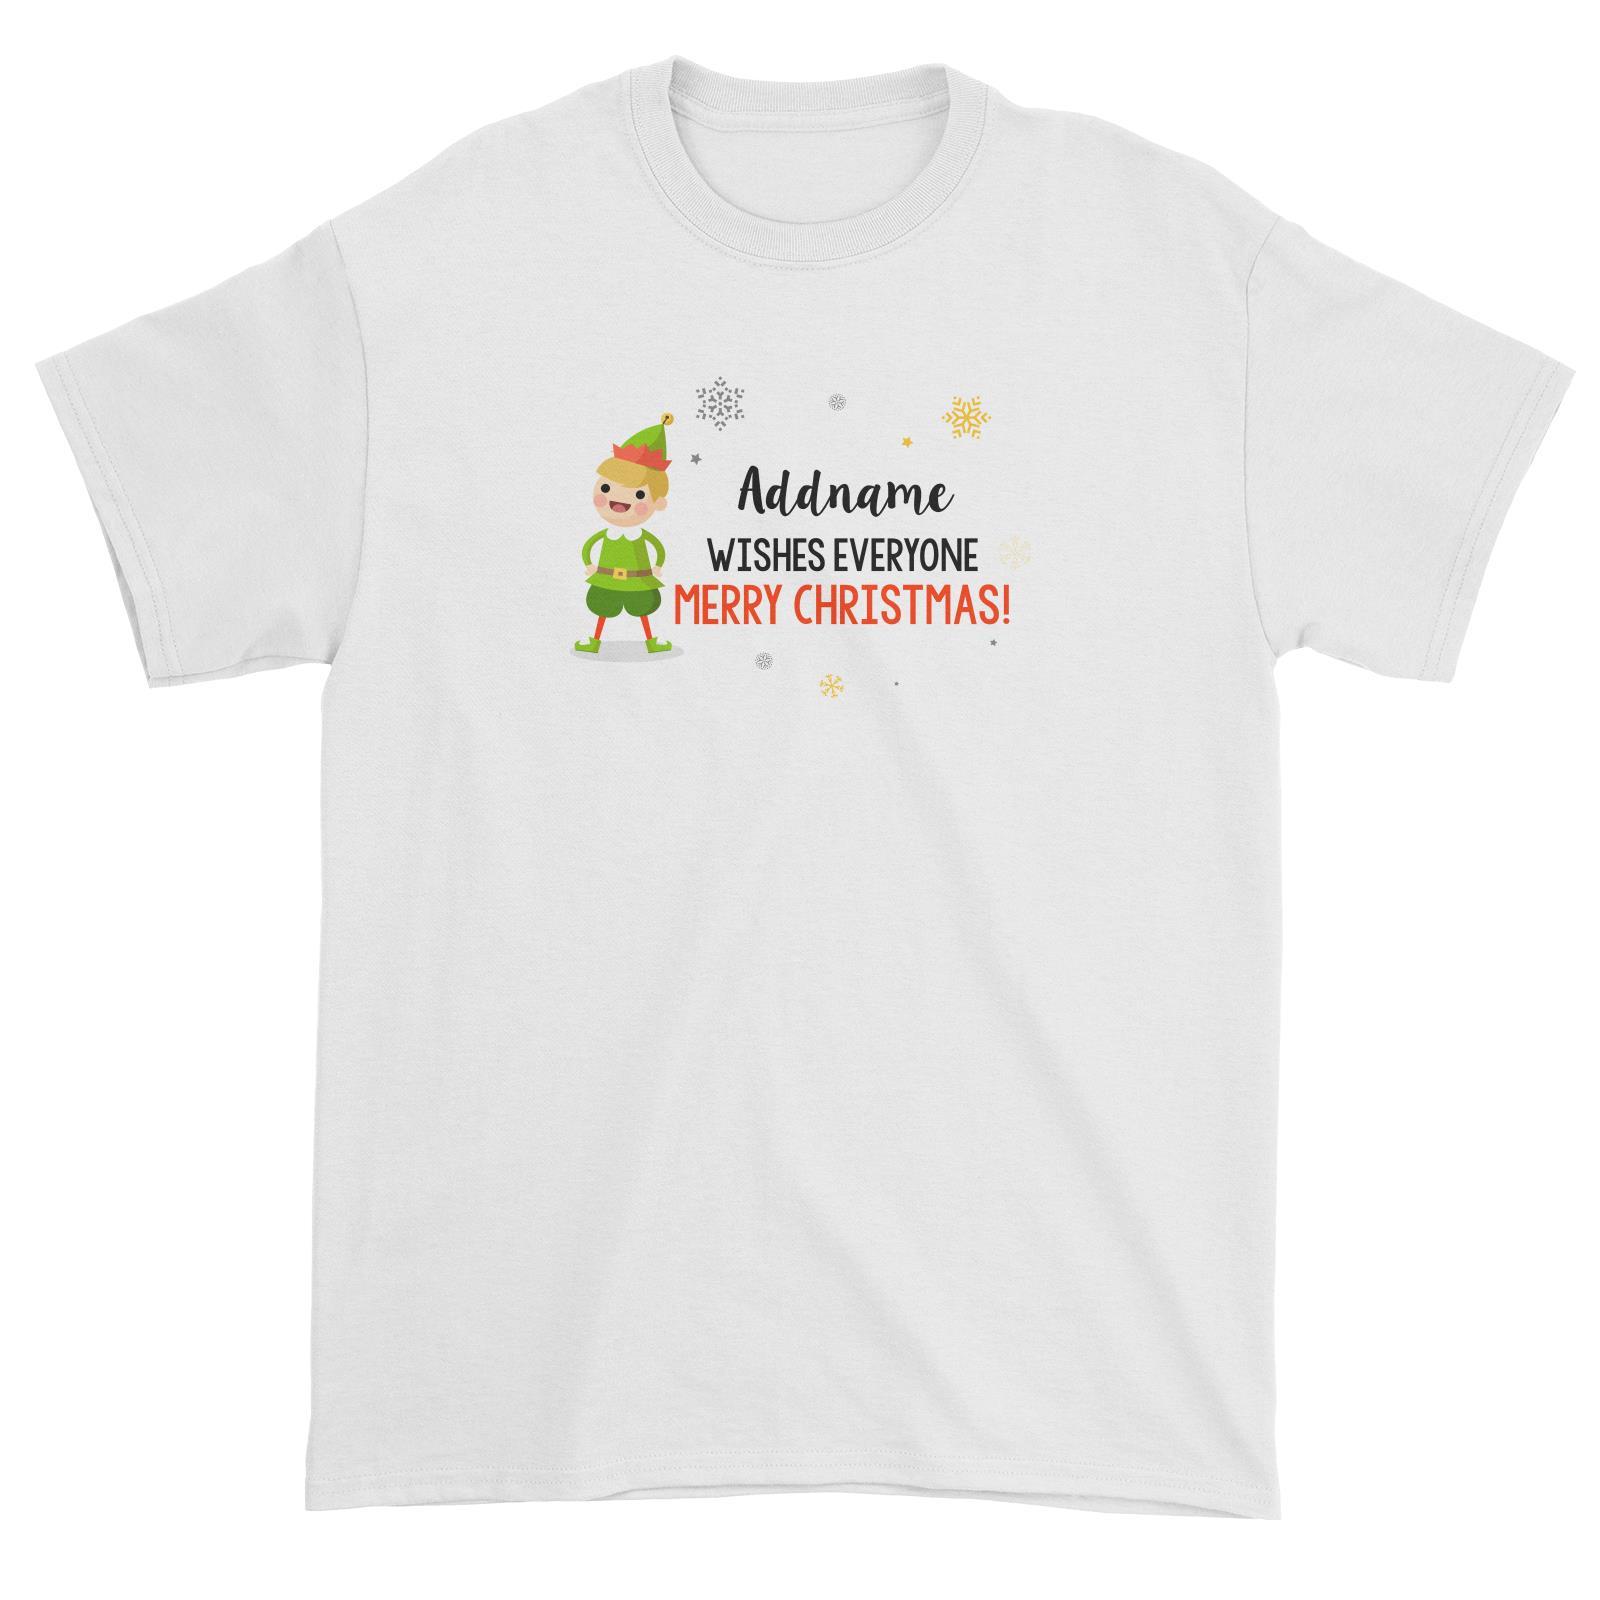 Cute Elf Boy Wishes Everyone Merry Christmas Addname Unisex T-Shirt  Matching Family Personalizable Designs